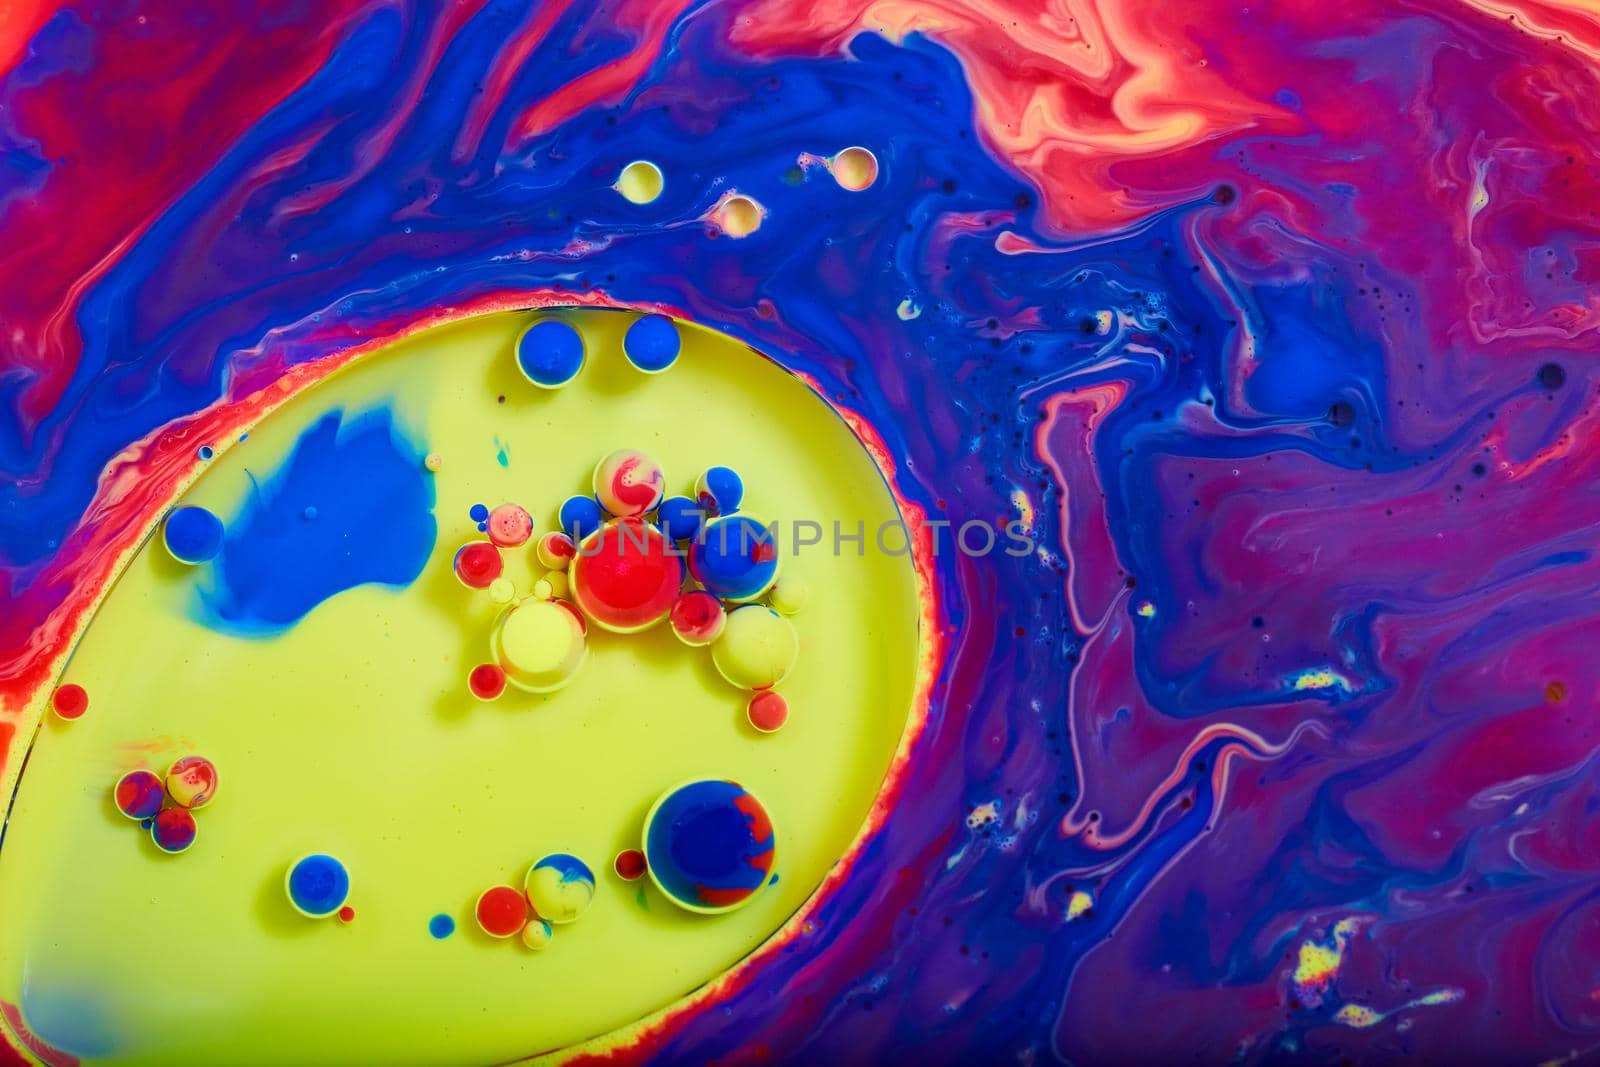 Image of Multicolored surface with circle of yellow and tiny spheres of red, blue, and yellow